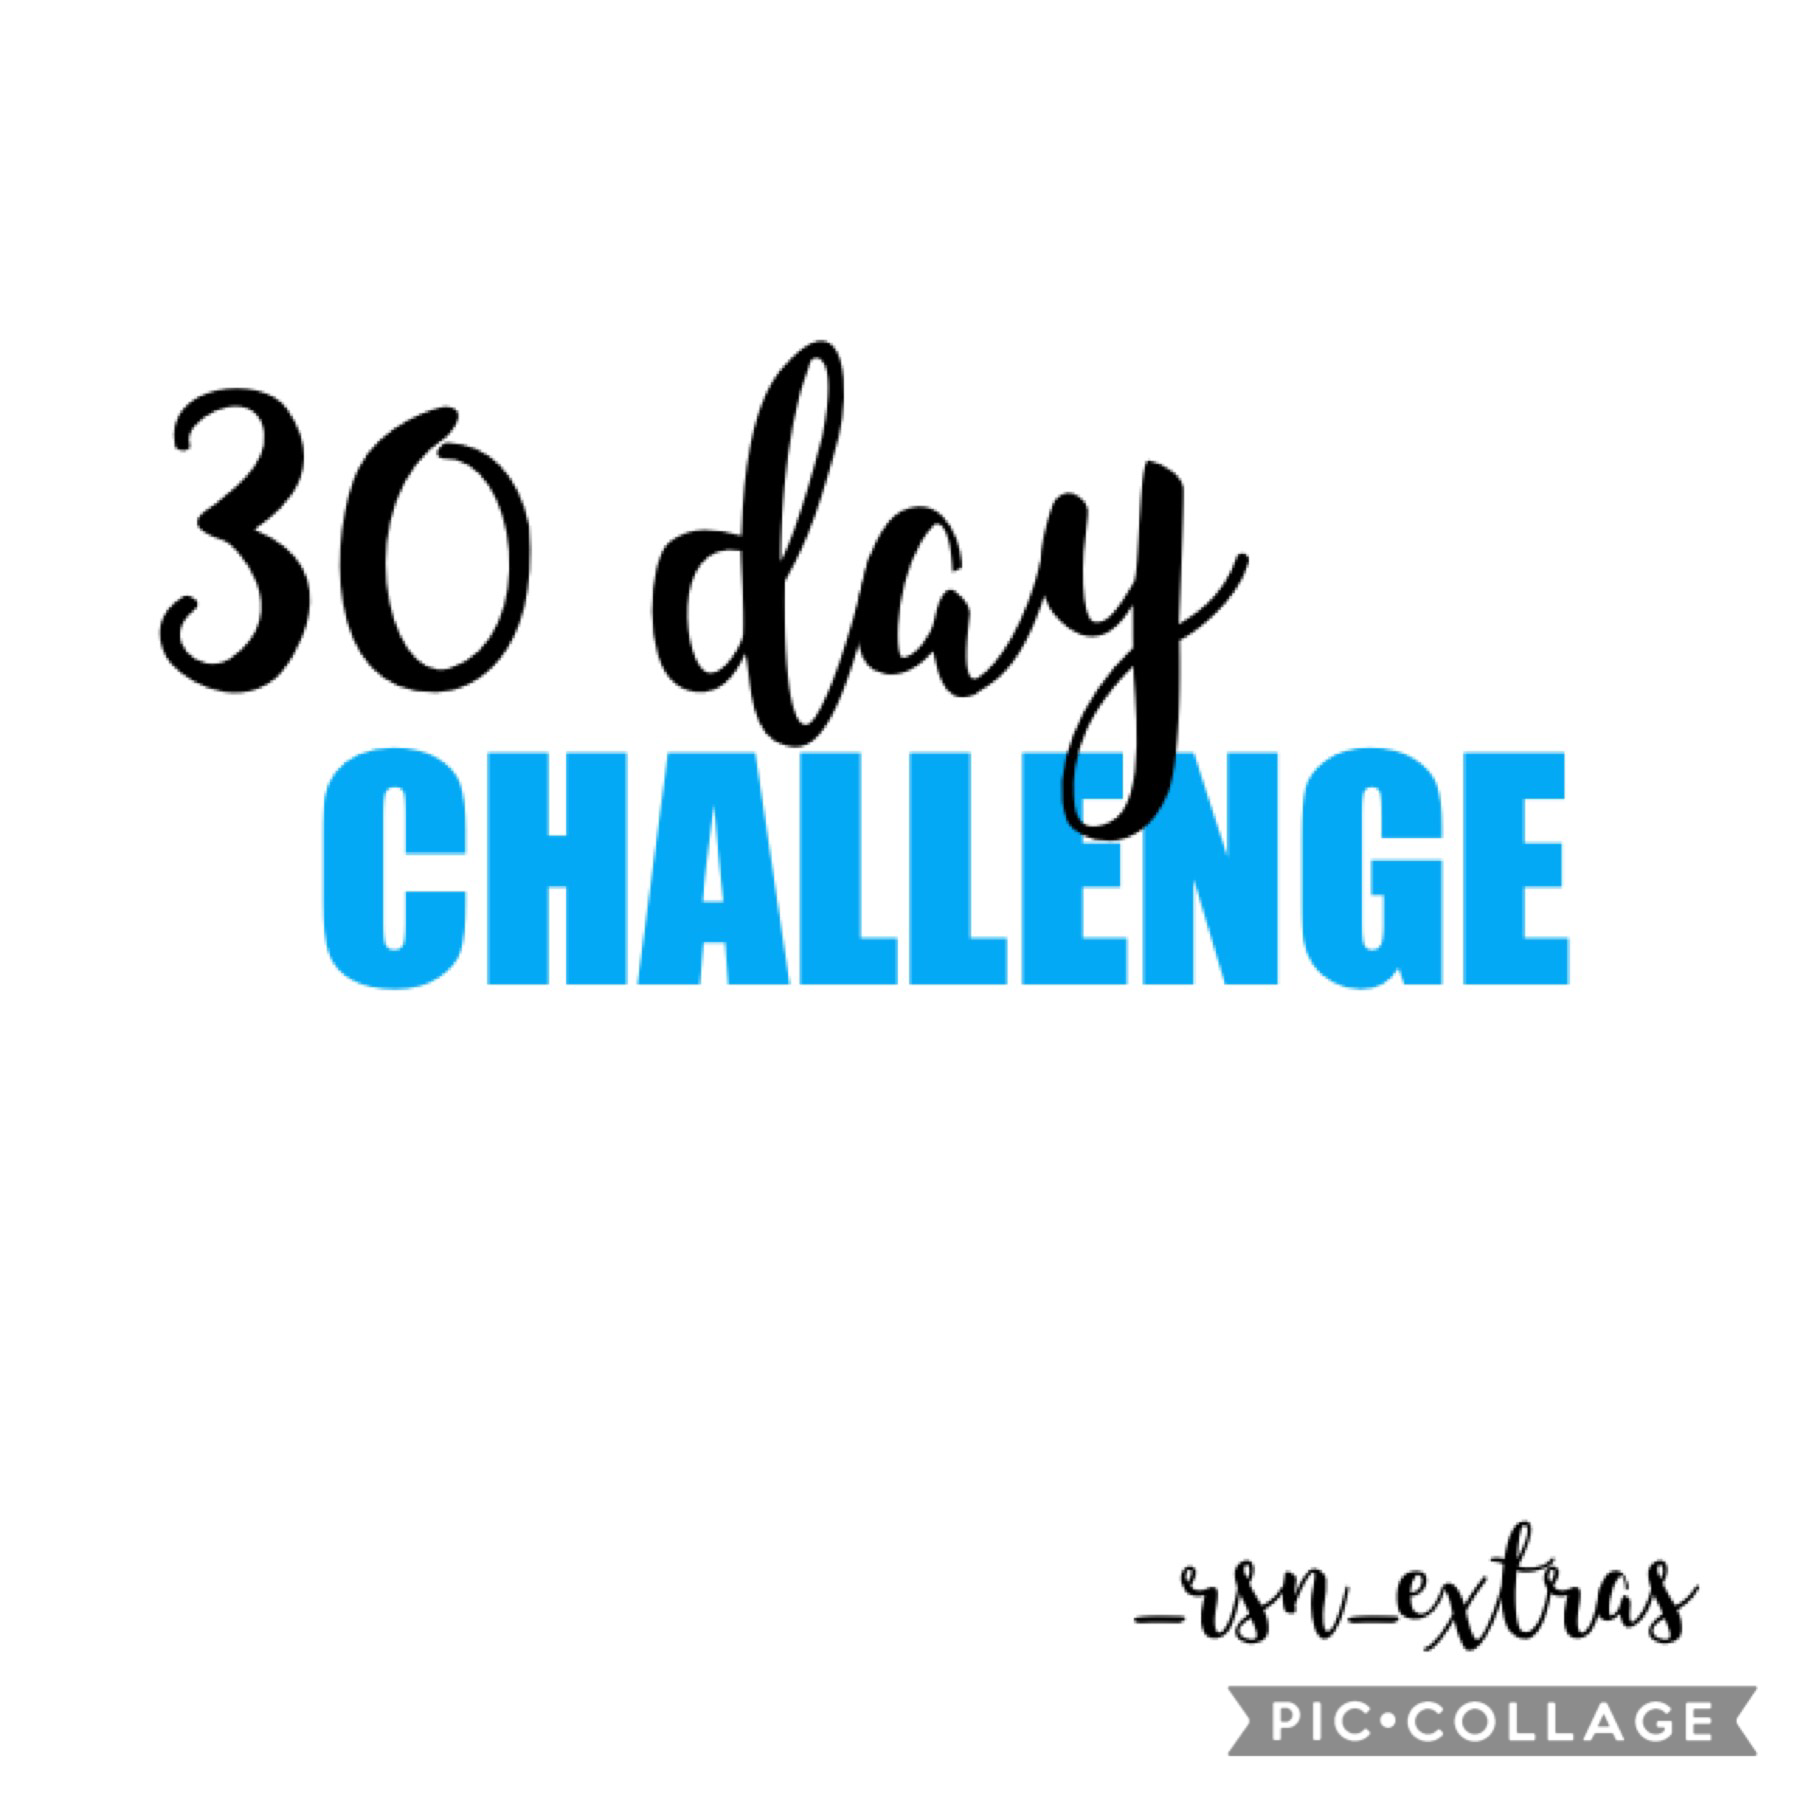 30 day challenge! It starts today! {26/09/18} 
^^ that’s  26th September! 
